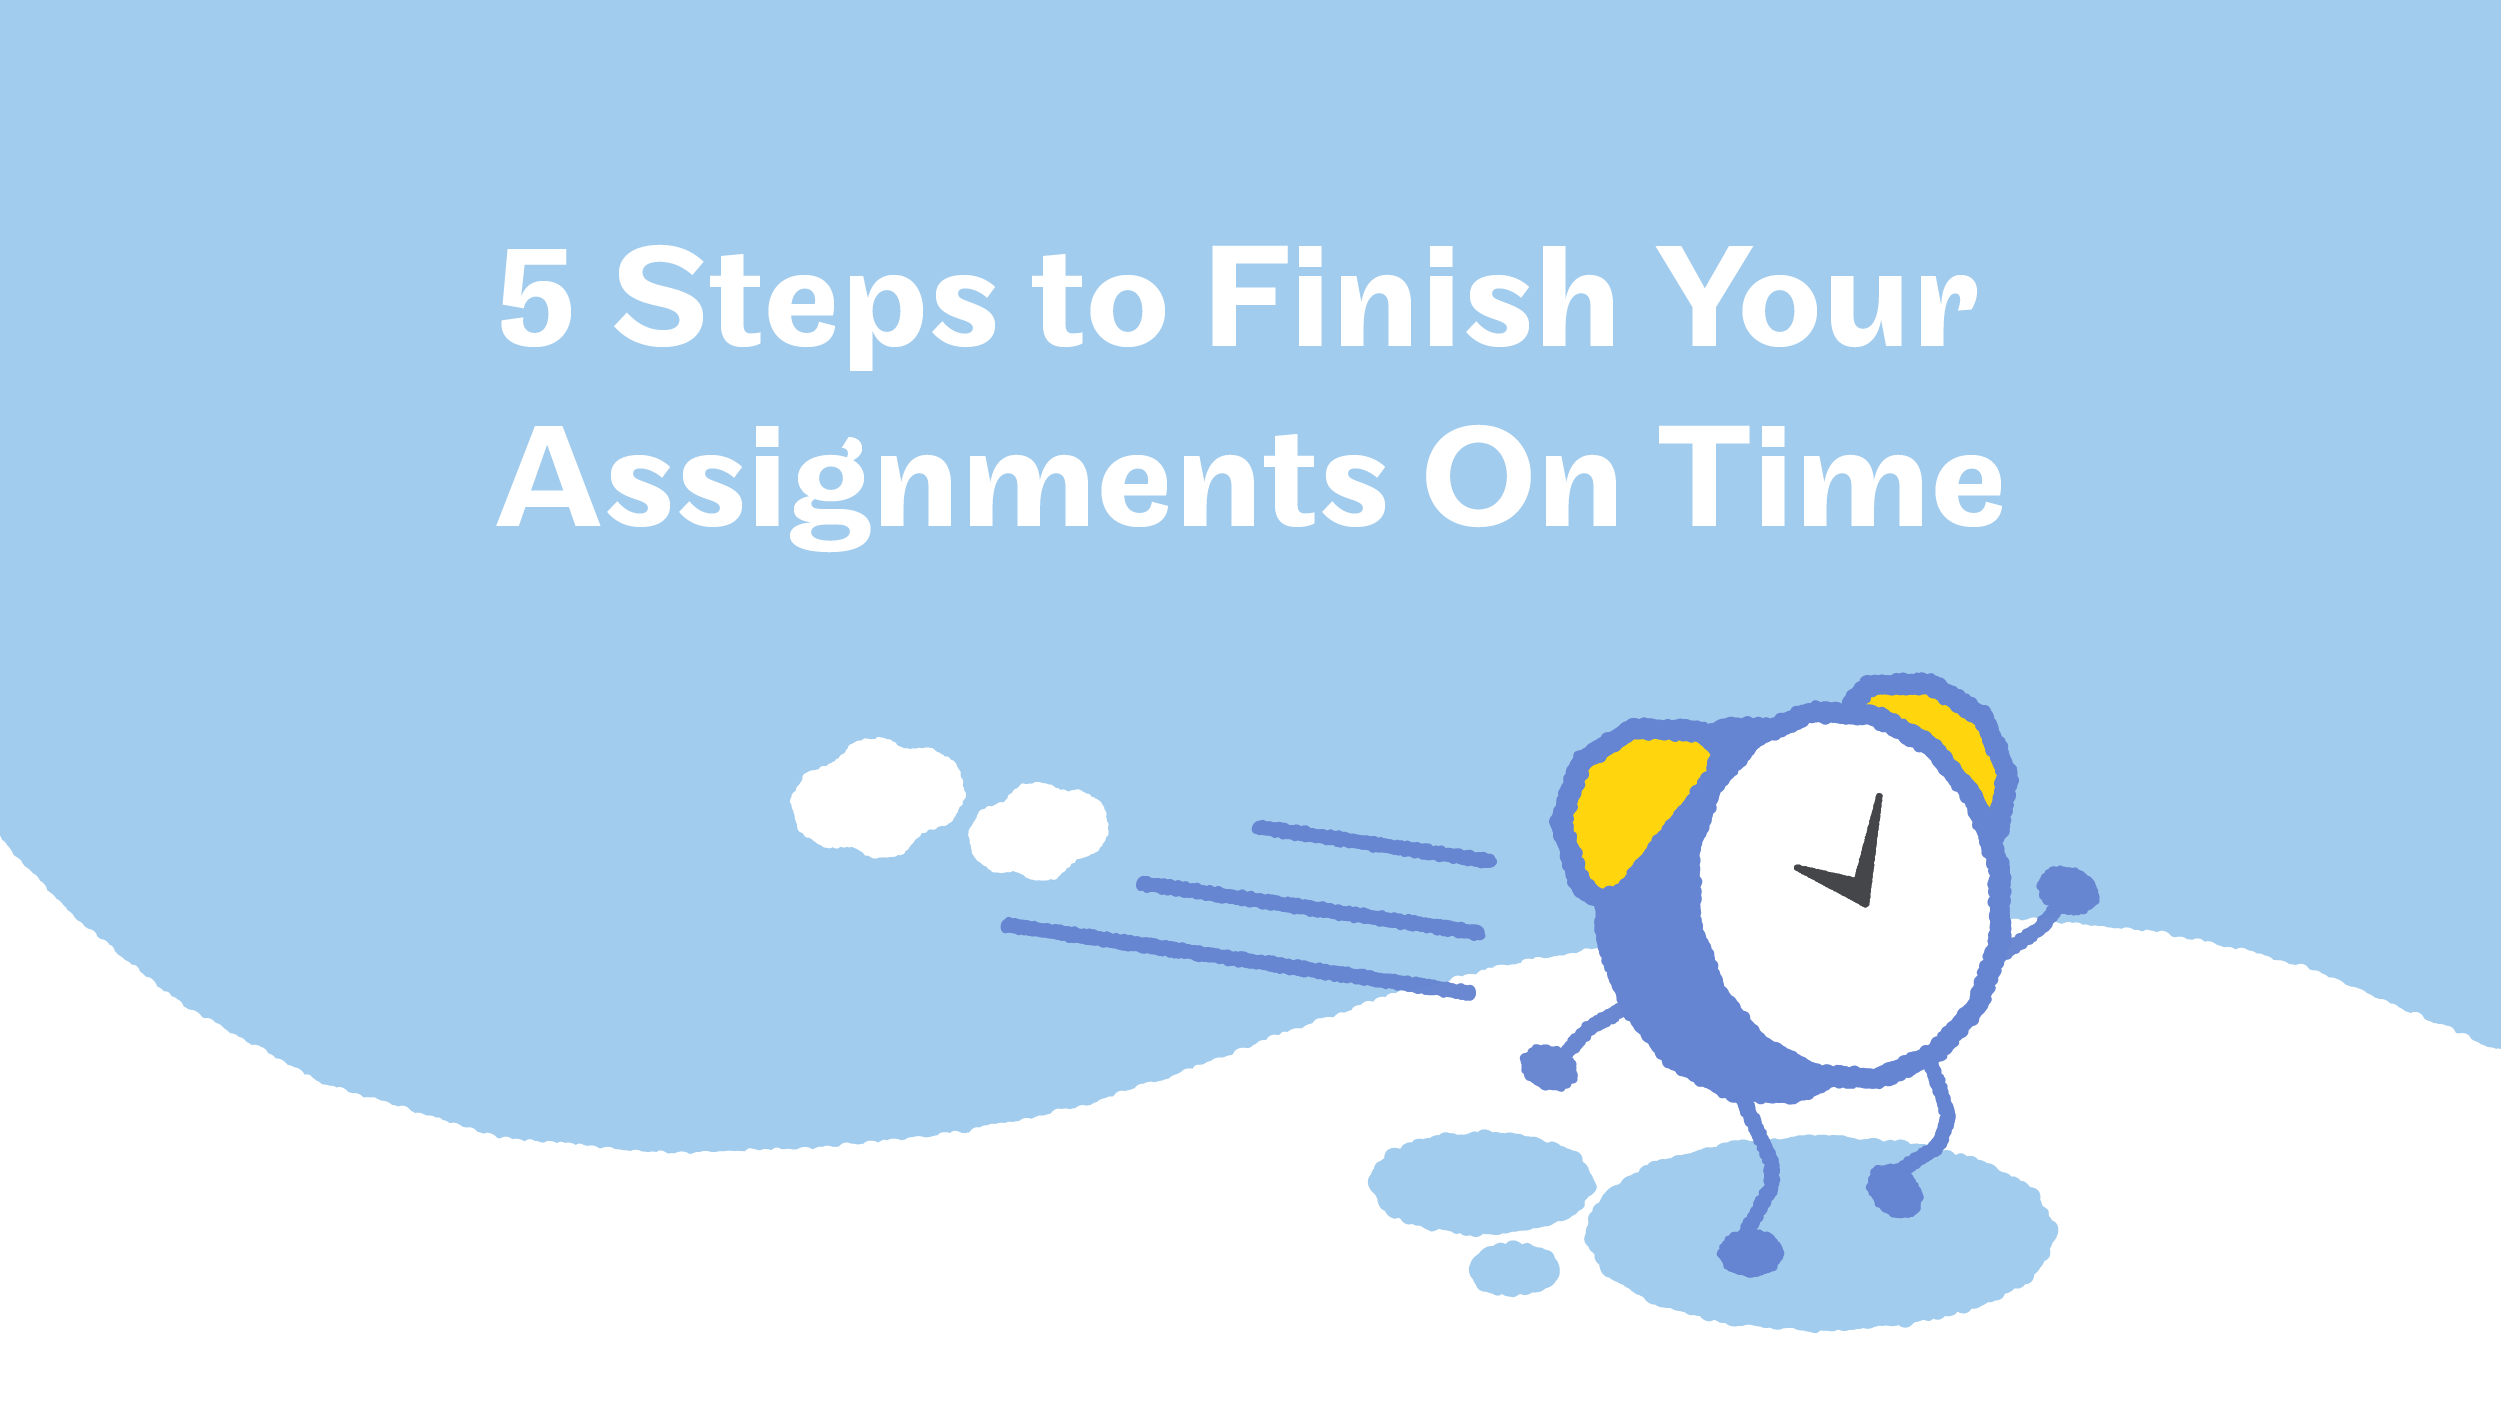 5 Steps to Finish Your Assignment on Time